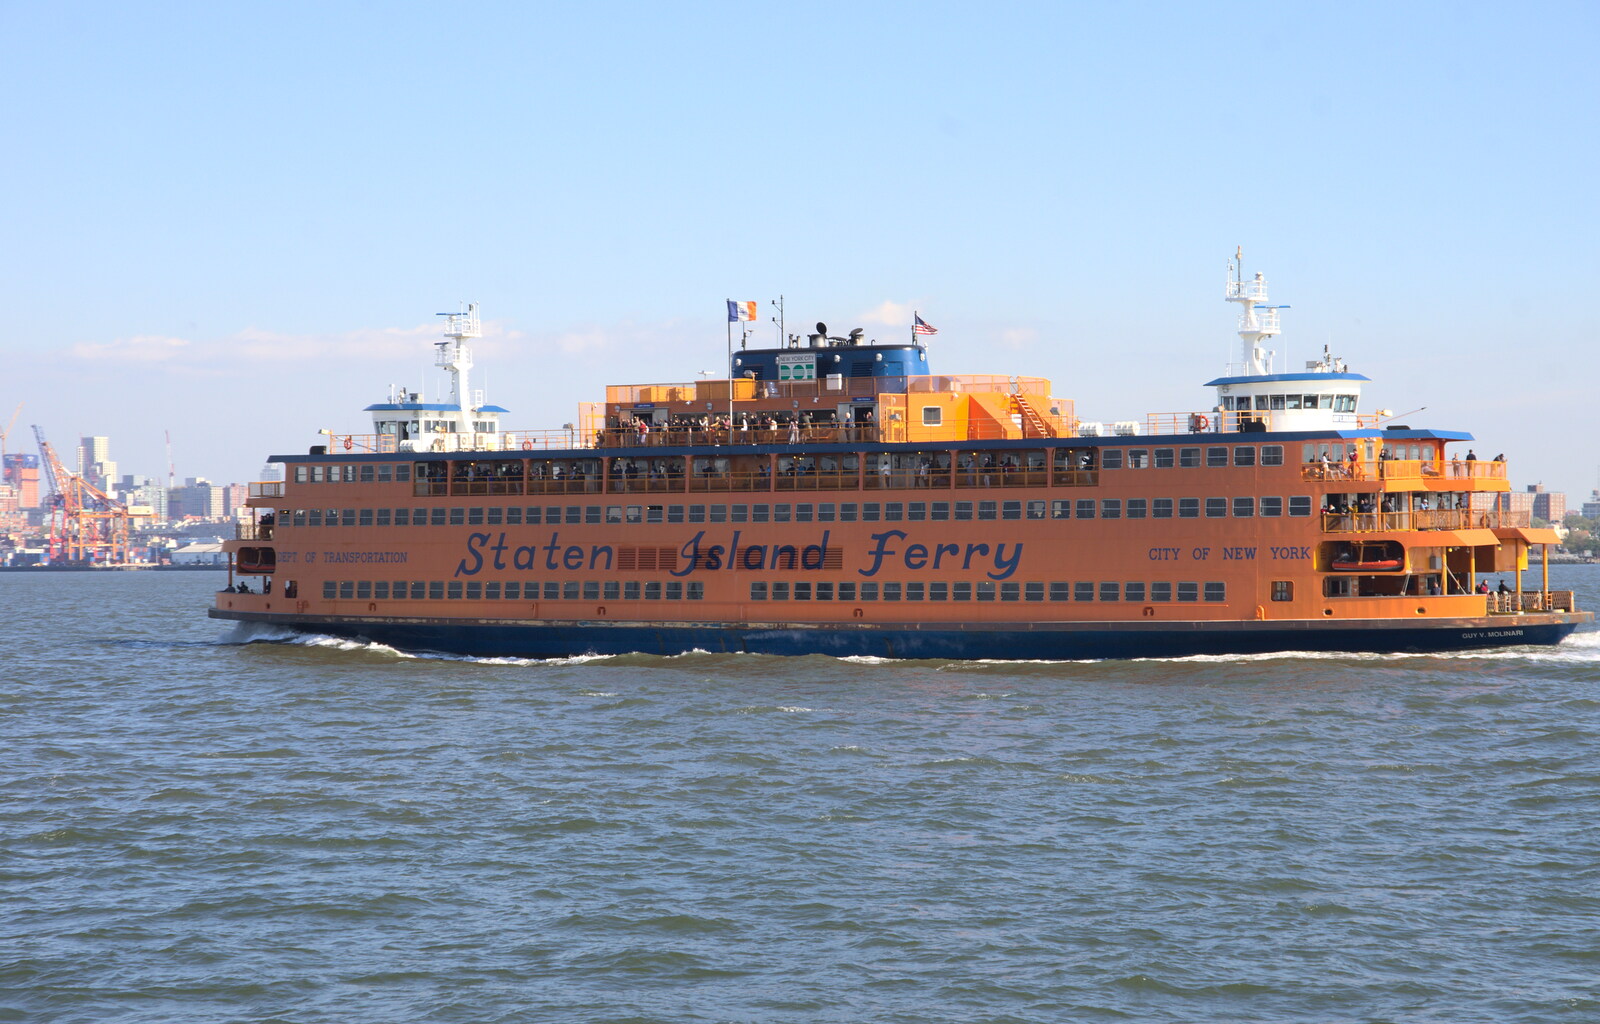 The Staten Island ferry from The Liberty Cruise and One World Trade Center, New York, United States - 23rd October 2018